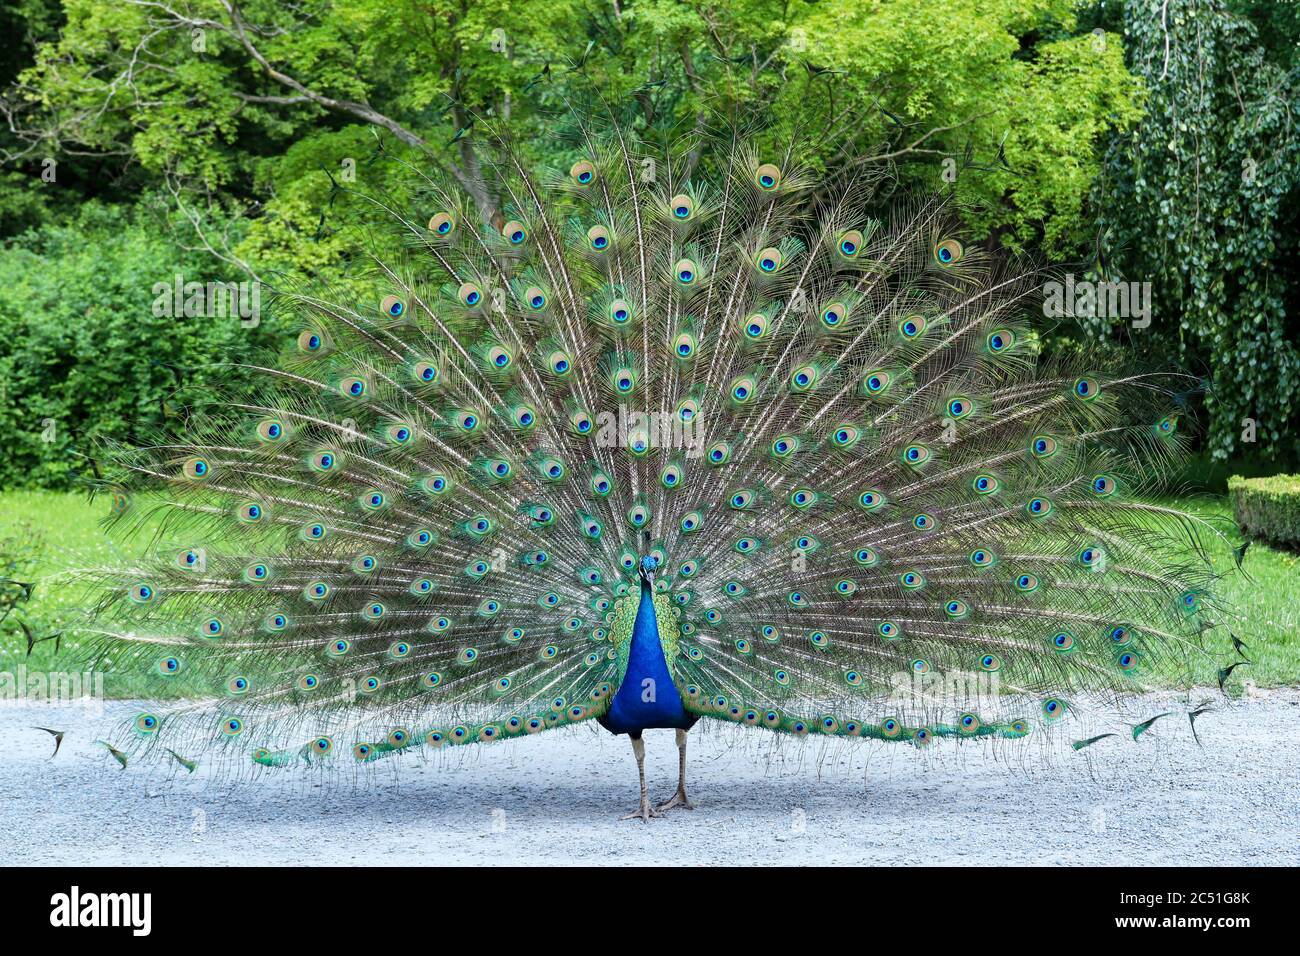 Peacock showing its long tail with beautiful feathers with eye-like markings Stock Photo